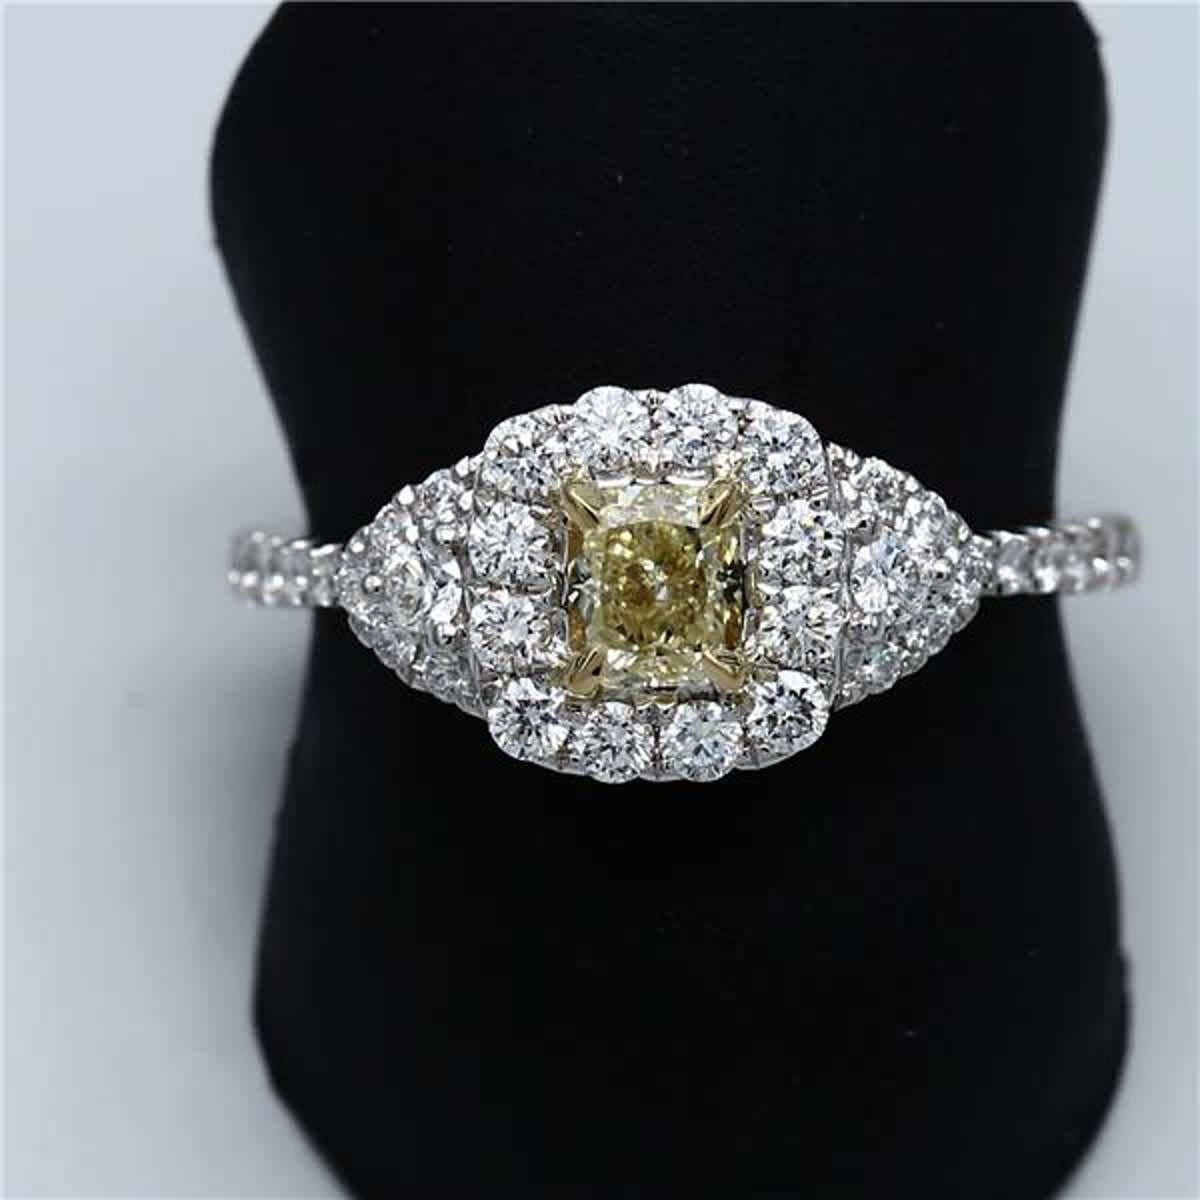 Rare radiant natural yellow diamond surrounded with natural round white diamonds. This ring is designed to be in a simple but intriguing setting with a single array of diamonds surrounding the centerstone as well as diamonds along the band. Can be